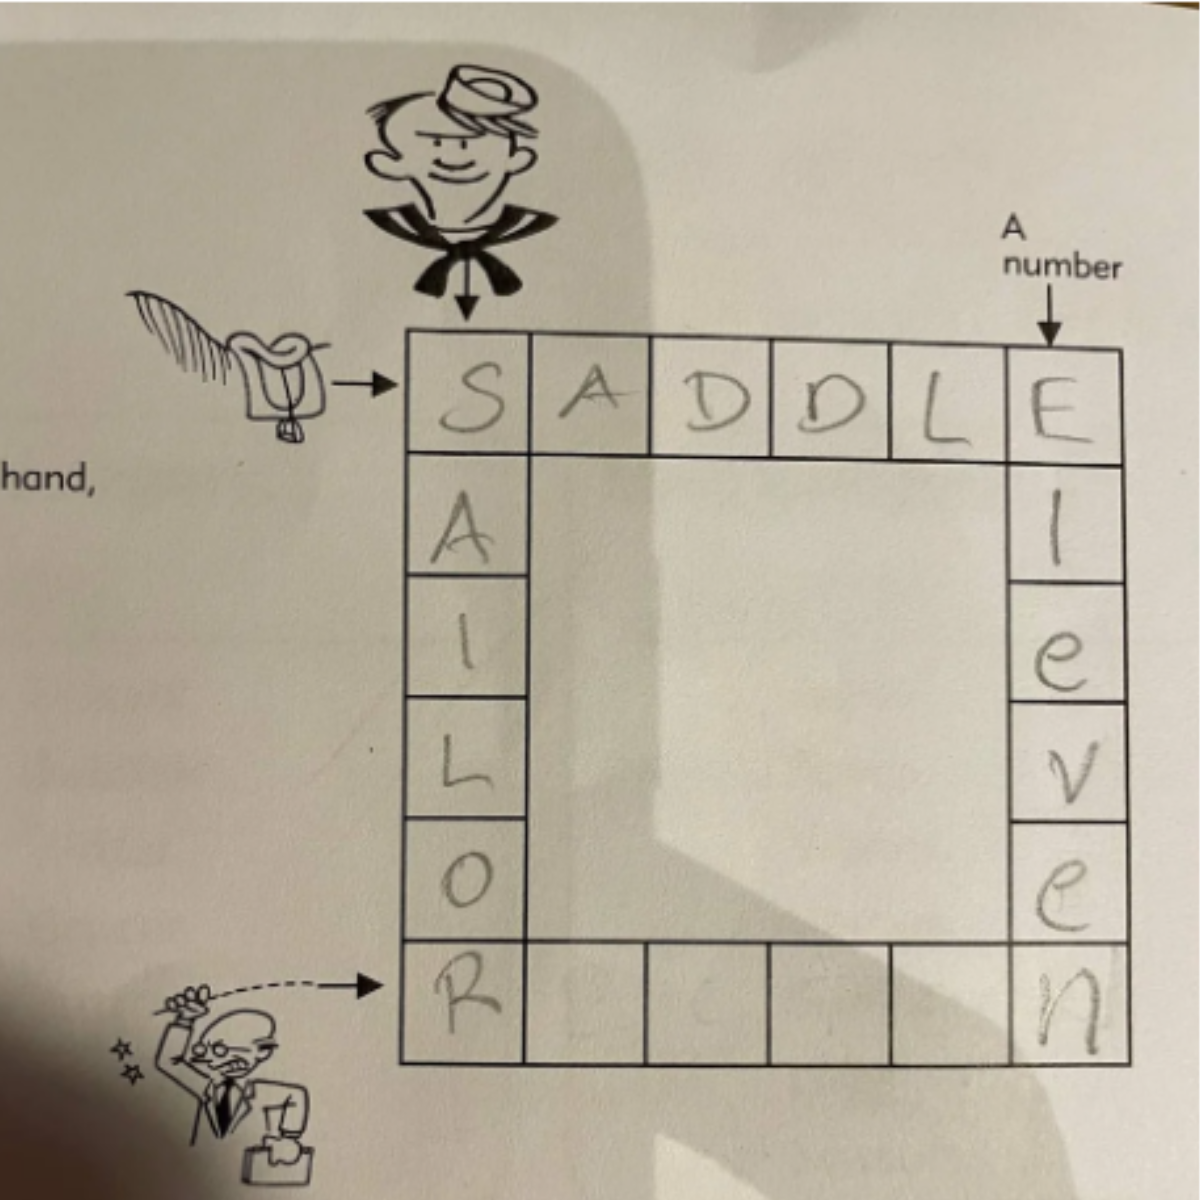 The crossword puzzle that had people baffled.